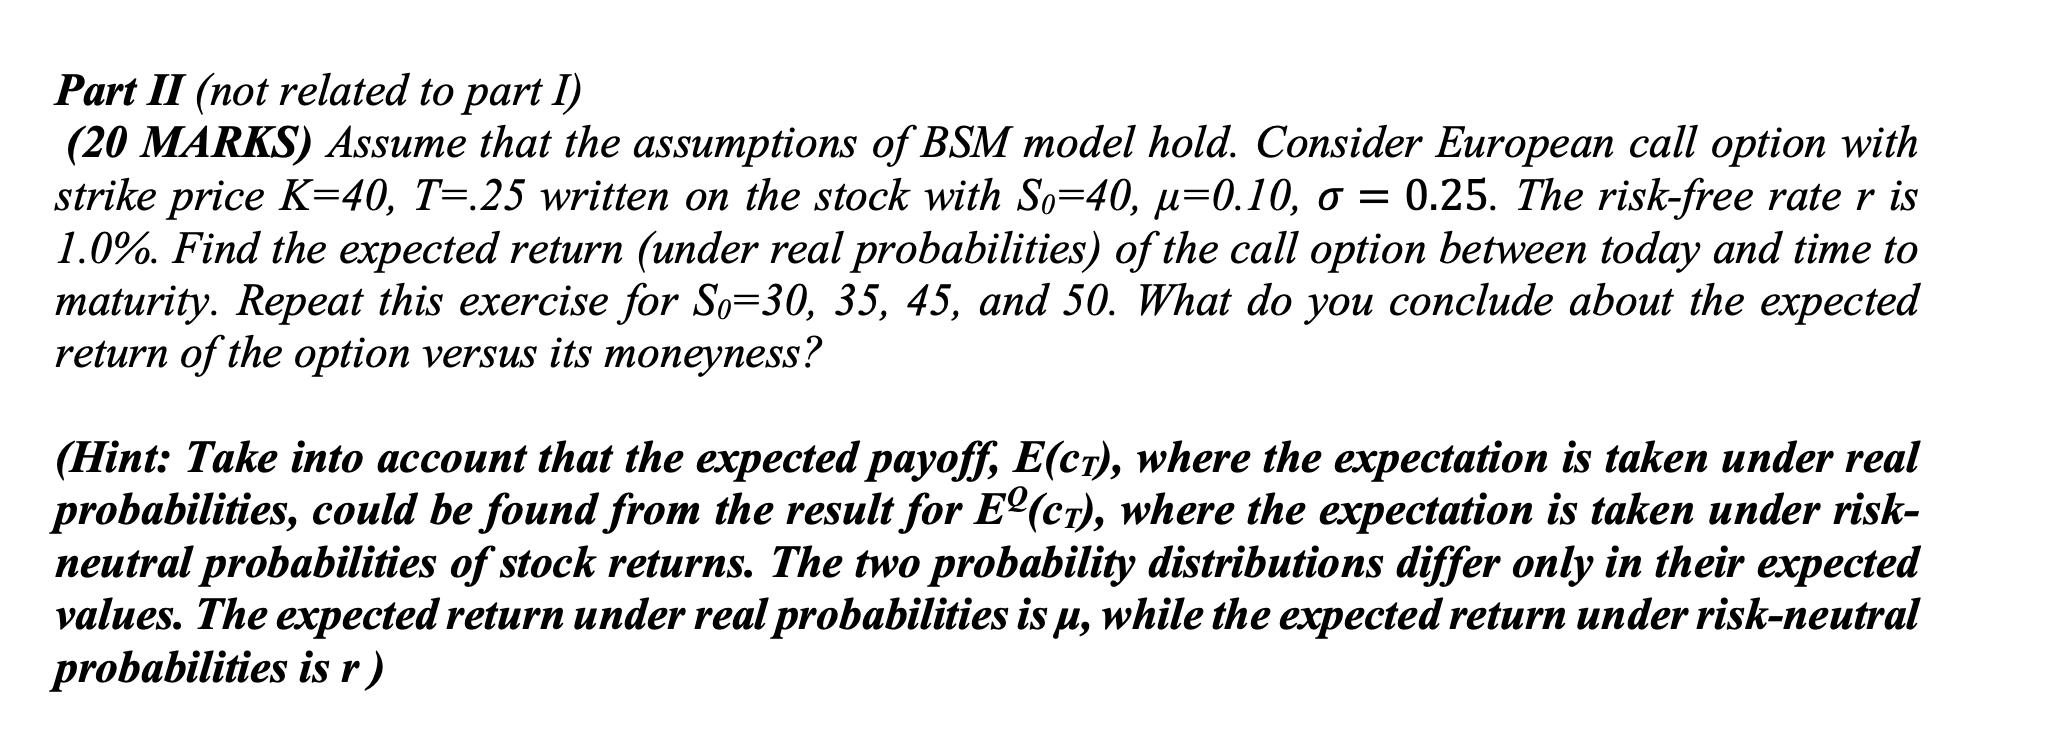 Part II (not related to part I) (20 MARKS) Assume that the assumptions of BSM model hold. Consider European